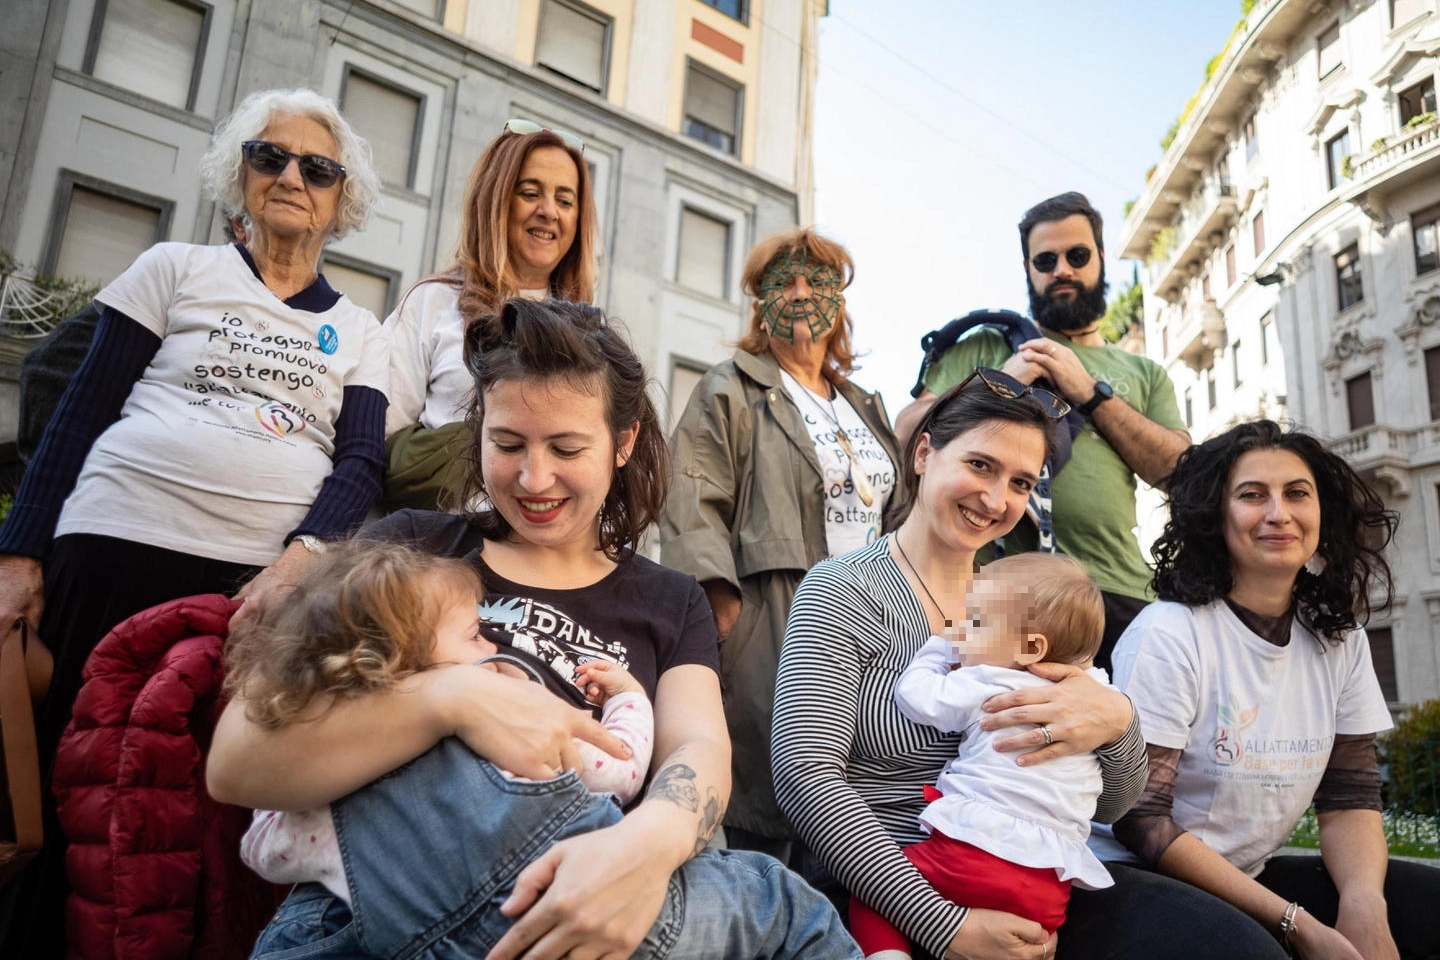 Il flash mob delle “Mamme peer" in piazza Duse